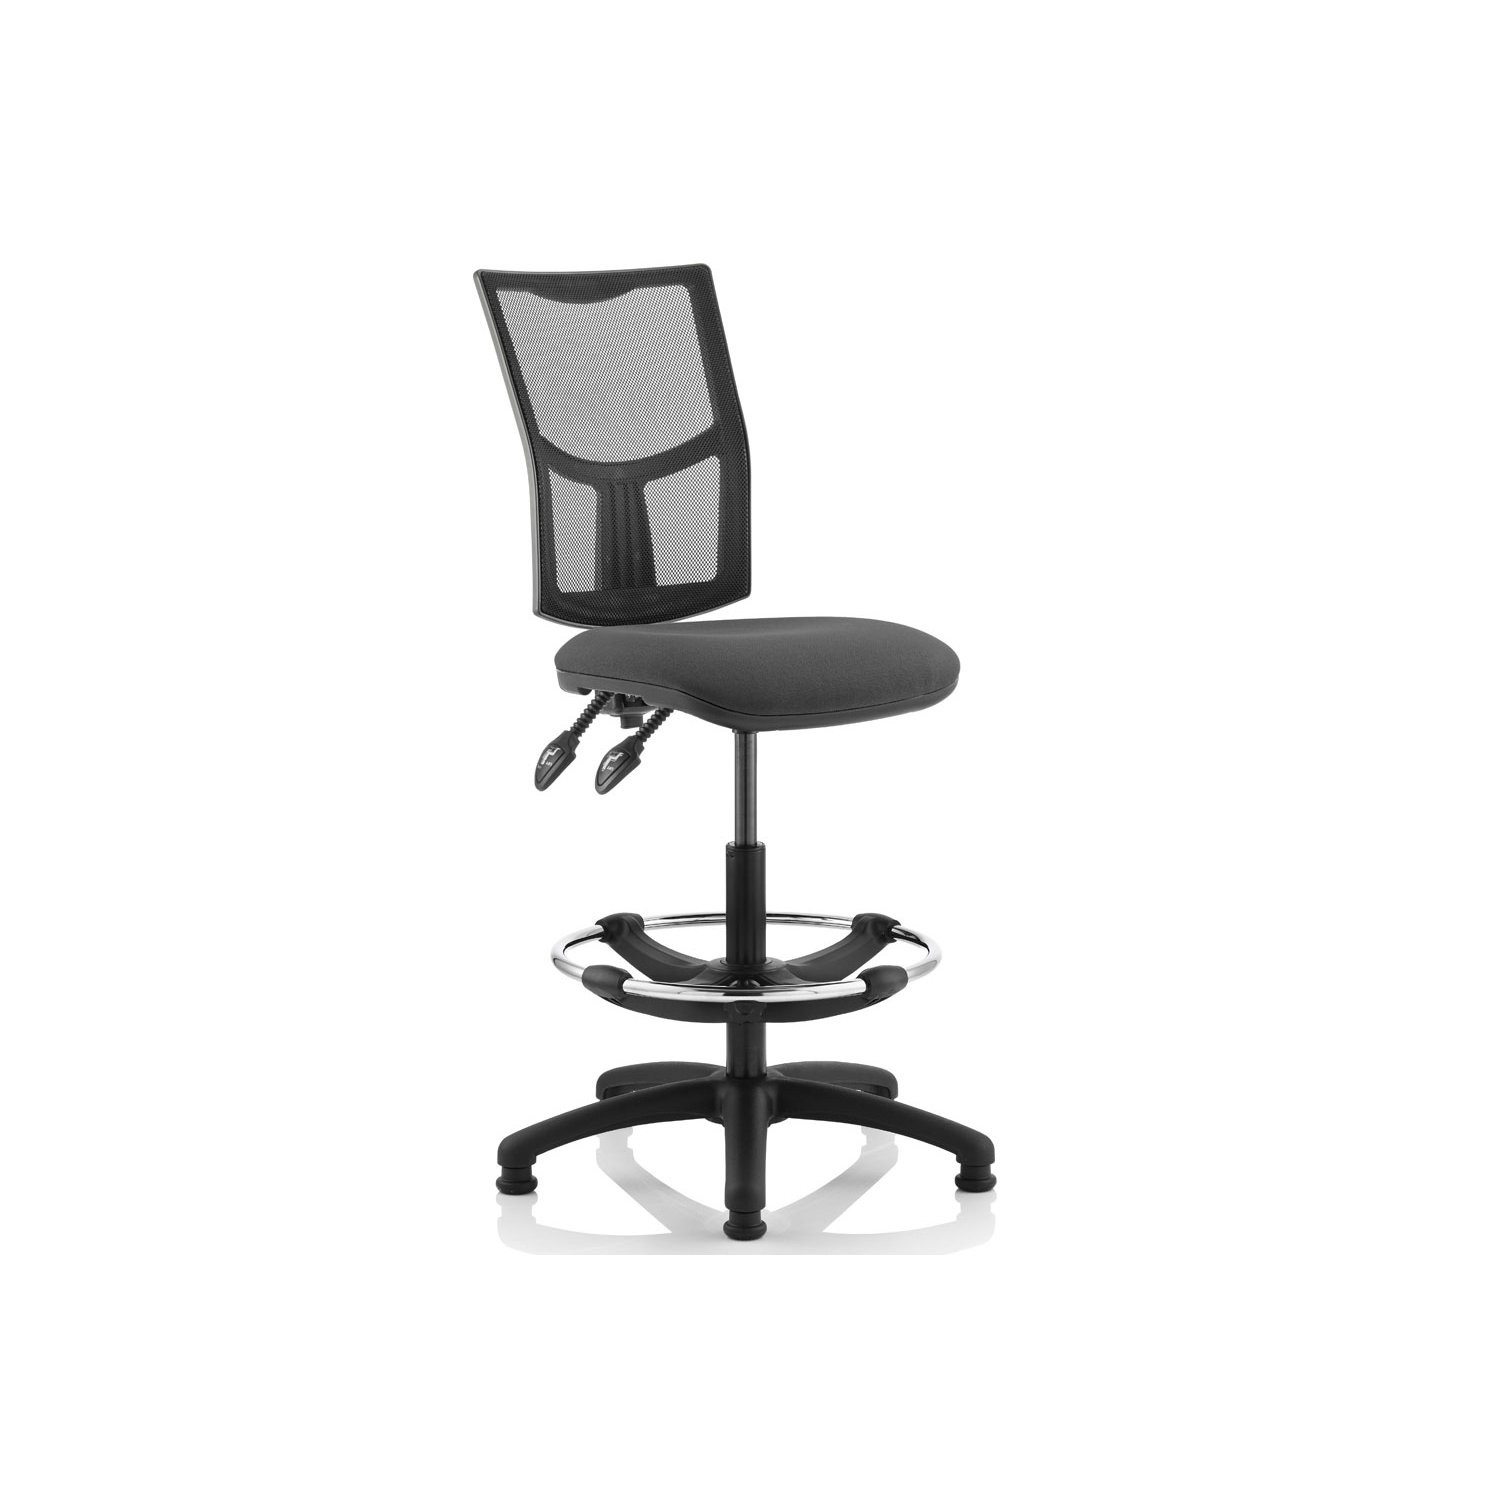 Lunar 2 Lever Mesh Back Draughtsman Chair (No Arms), Charcoal